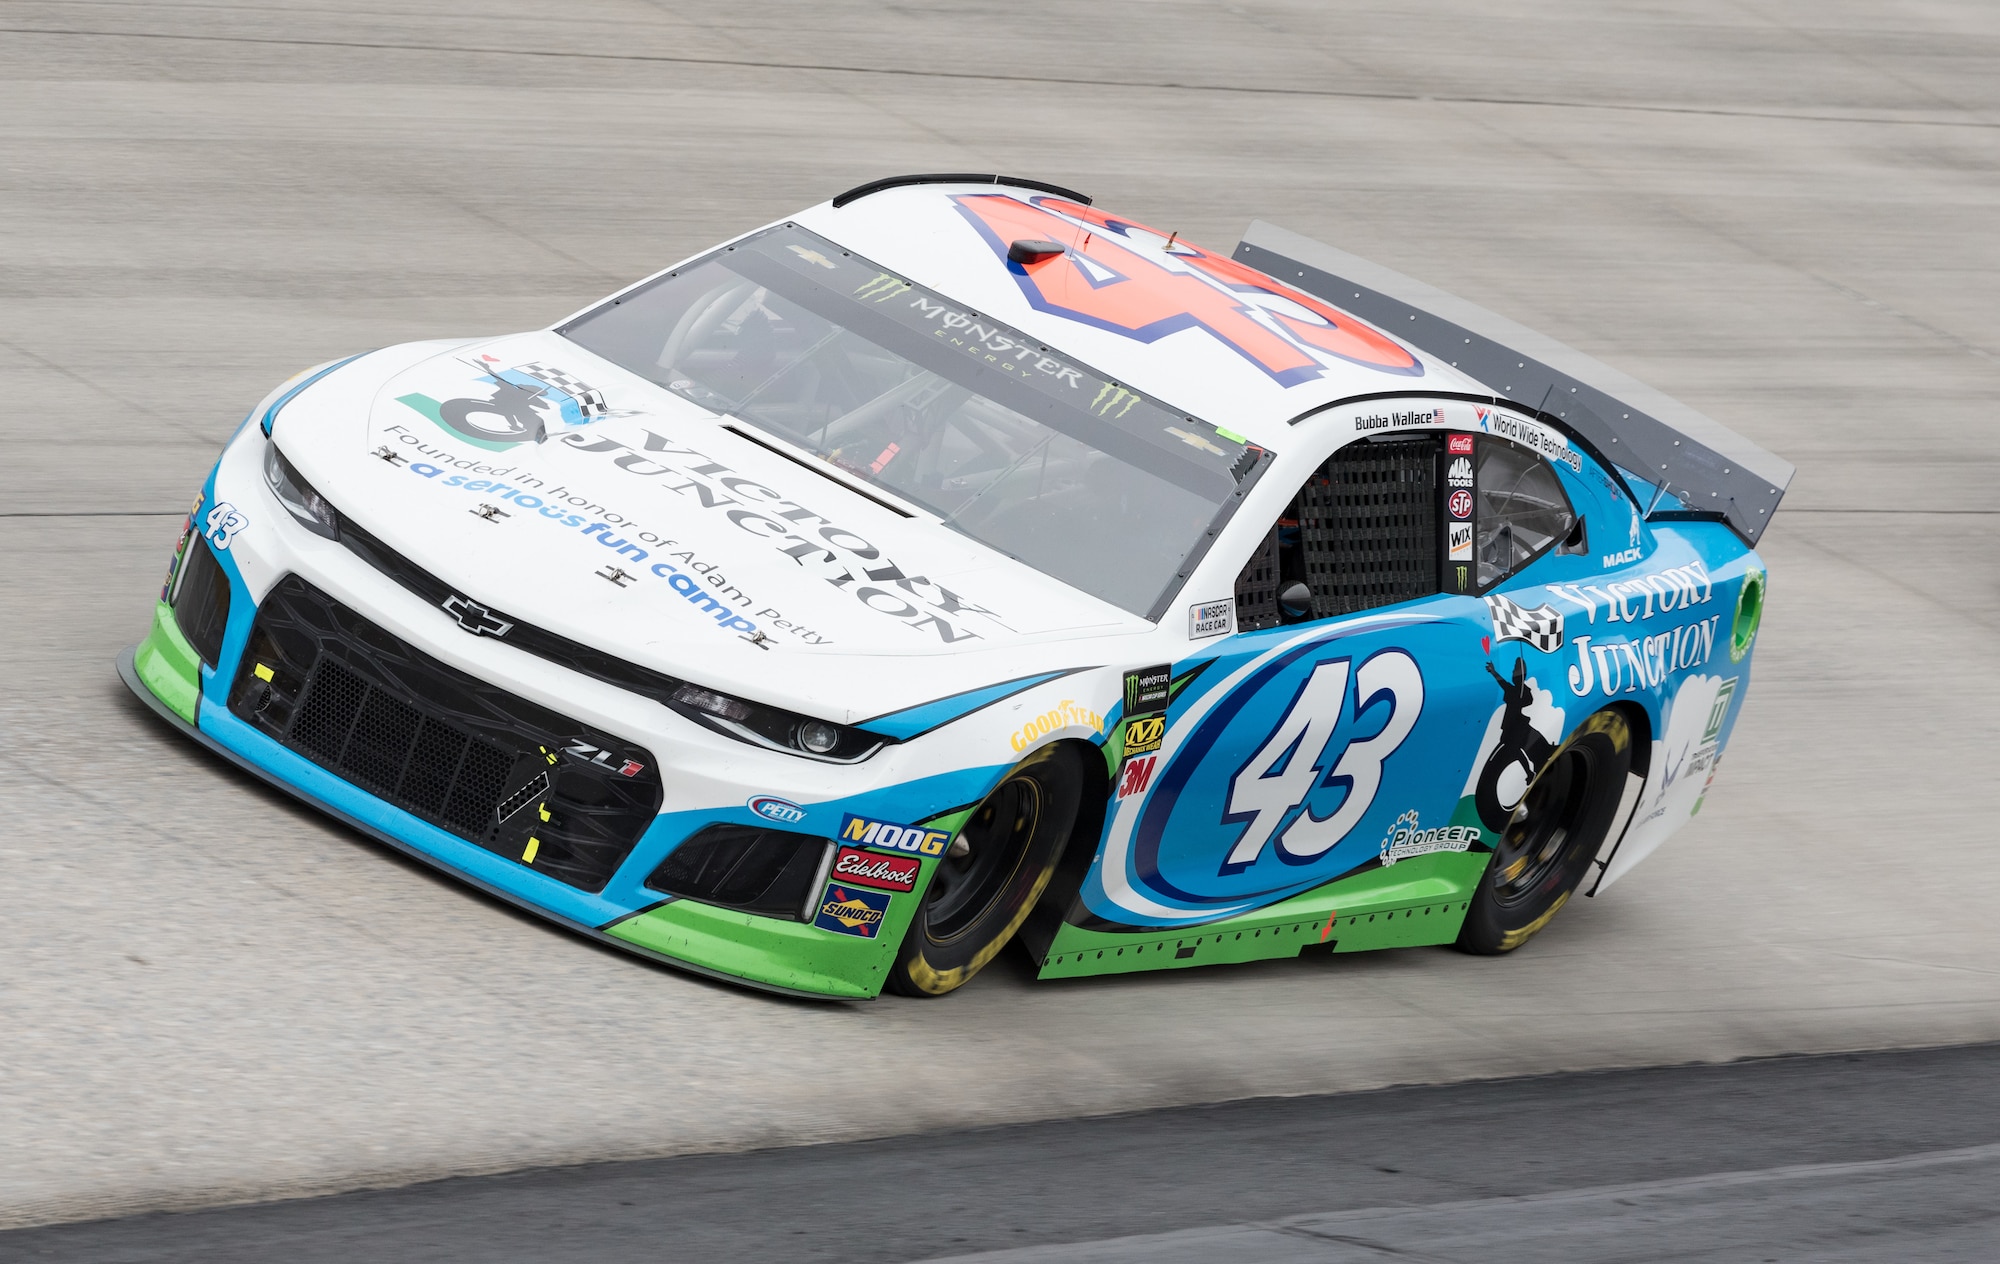 Bubba Wallace, driver of the No. 43 Victory Junction Chevrolet, races during the "Drydene 400" Monster Energy NASCAR Cup Series playoff race Oct. 6, 2019 at Dover International Speedway, Dover, Del. The U.S. Air Force is one of many sponsors of the No. 43 car that finished in 20th place in the "Drydene 400" Monster Energy NASCAR Cup Series playoff race. (U.S. Air Force photo by Roland Balik)